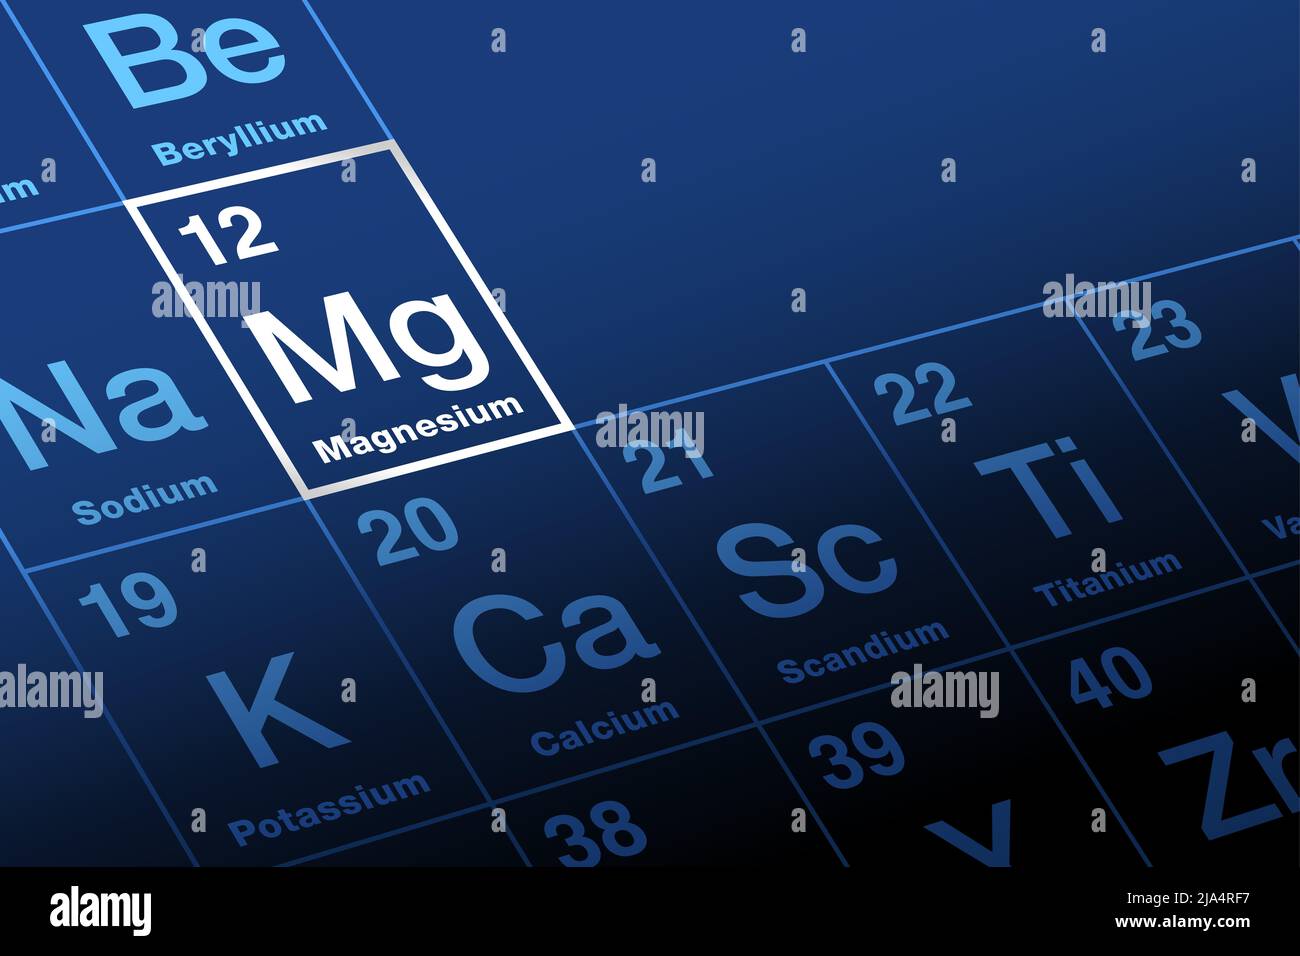 Magnesium on periodic table of the elements. Alkaline earth metal with symbol Mg and atomic number 12. 11th most abundant element in the human body. Stock Photo